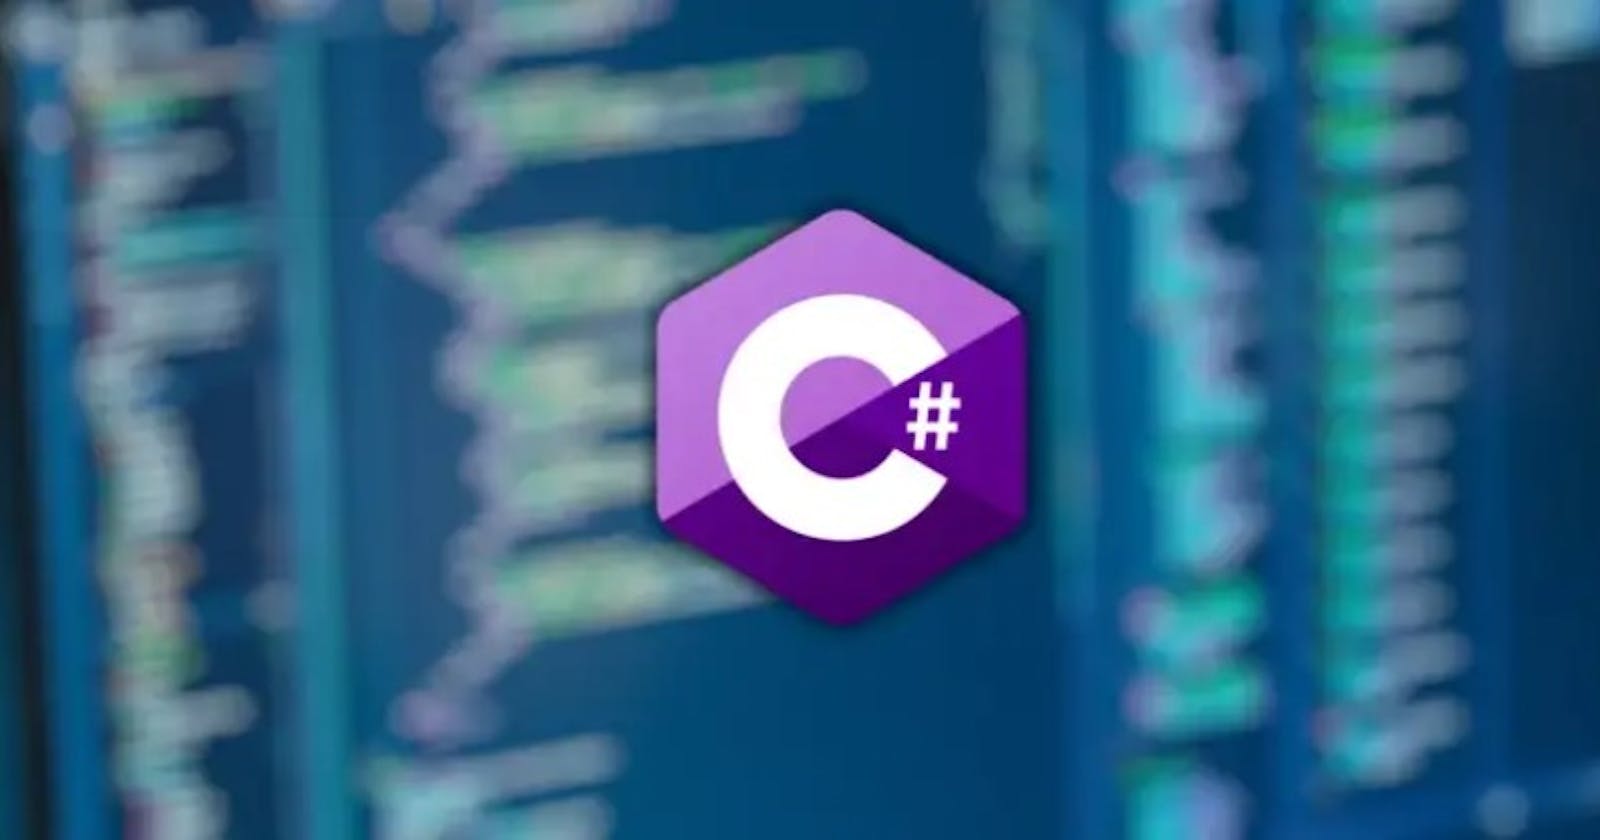 An Overview of the C# Language